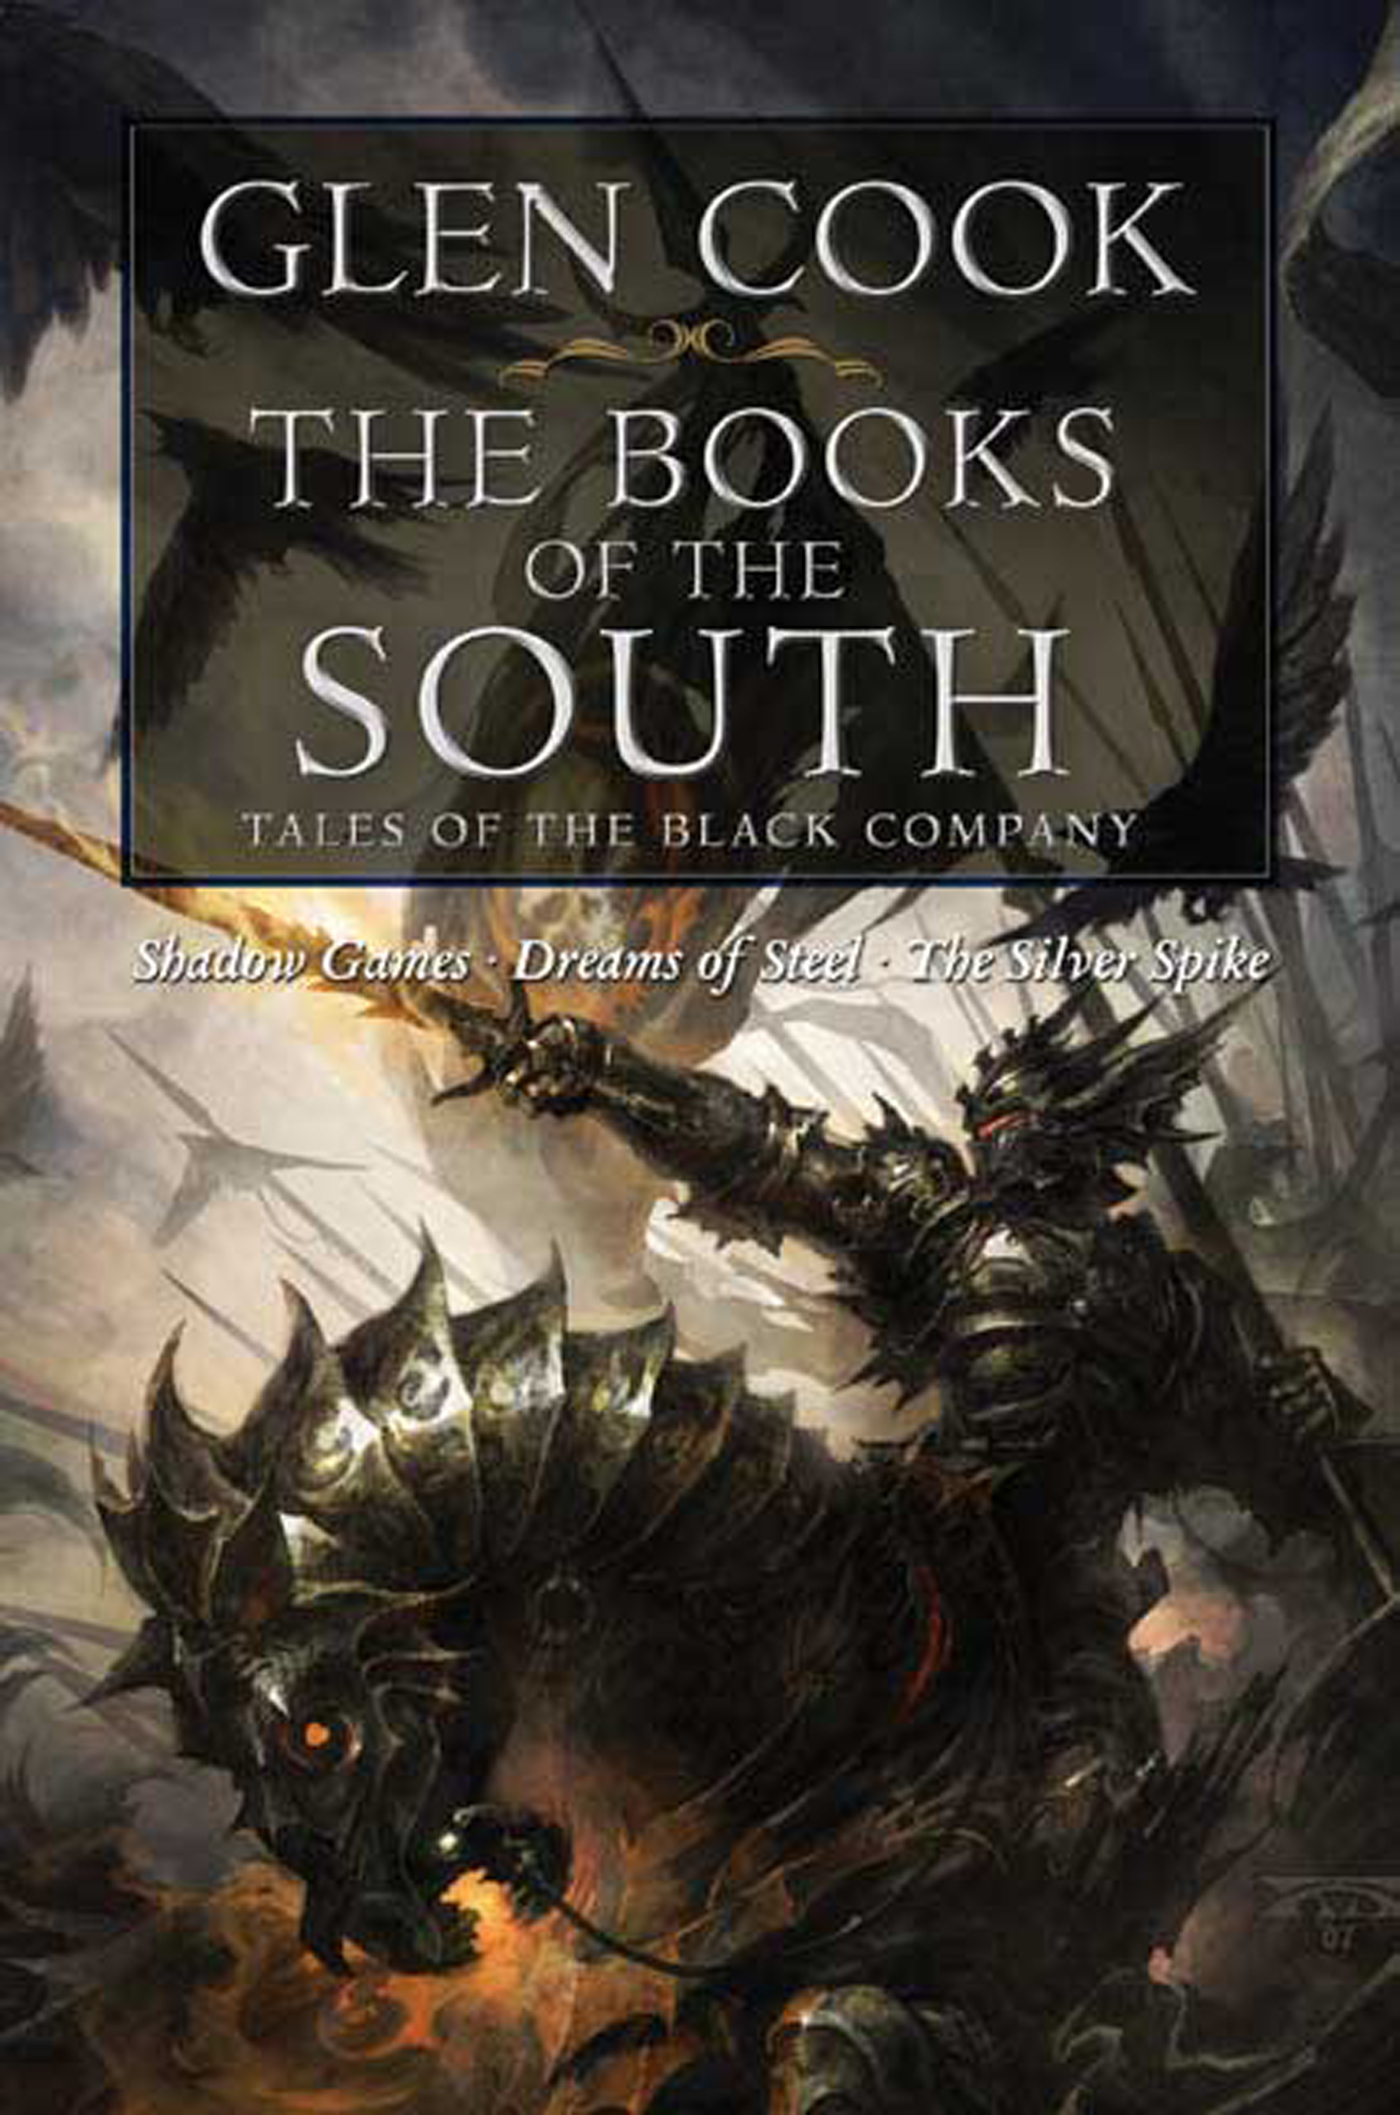 The Books of the South: Tales of the Black Company by Glen Cook